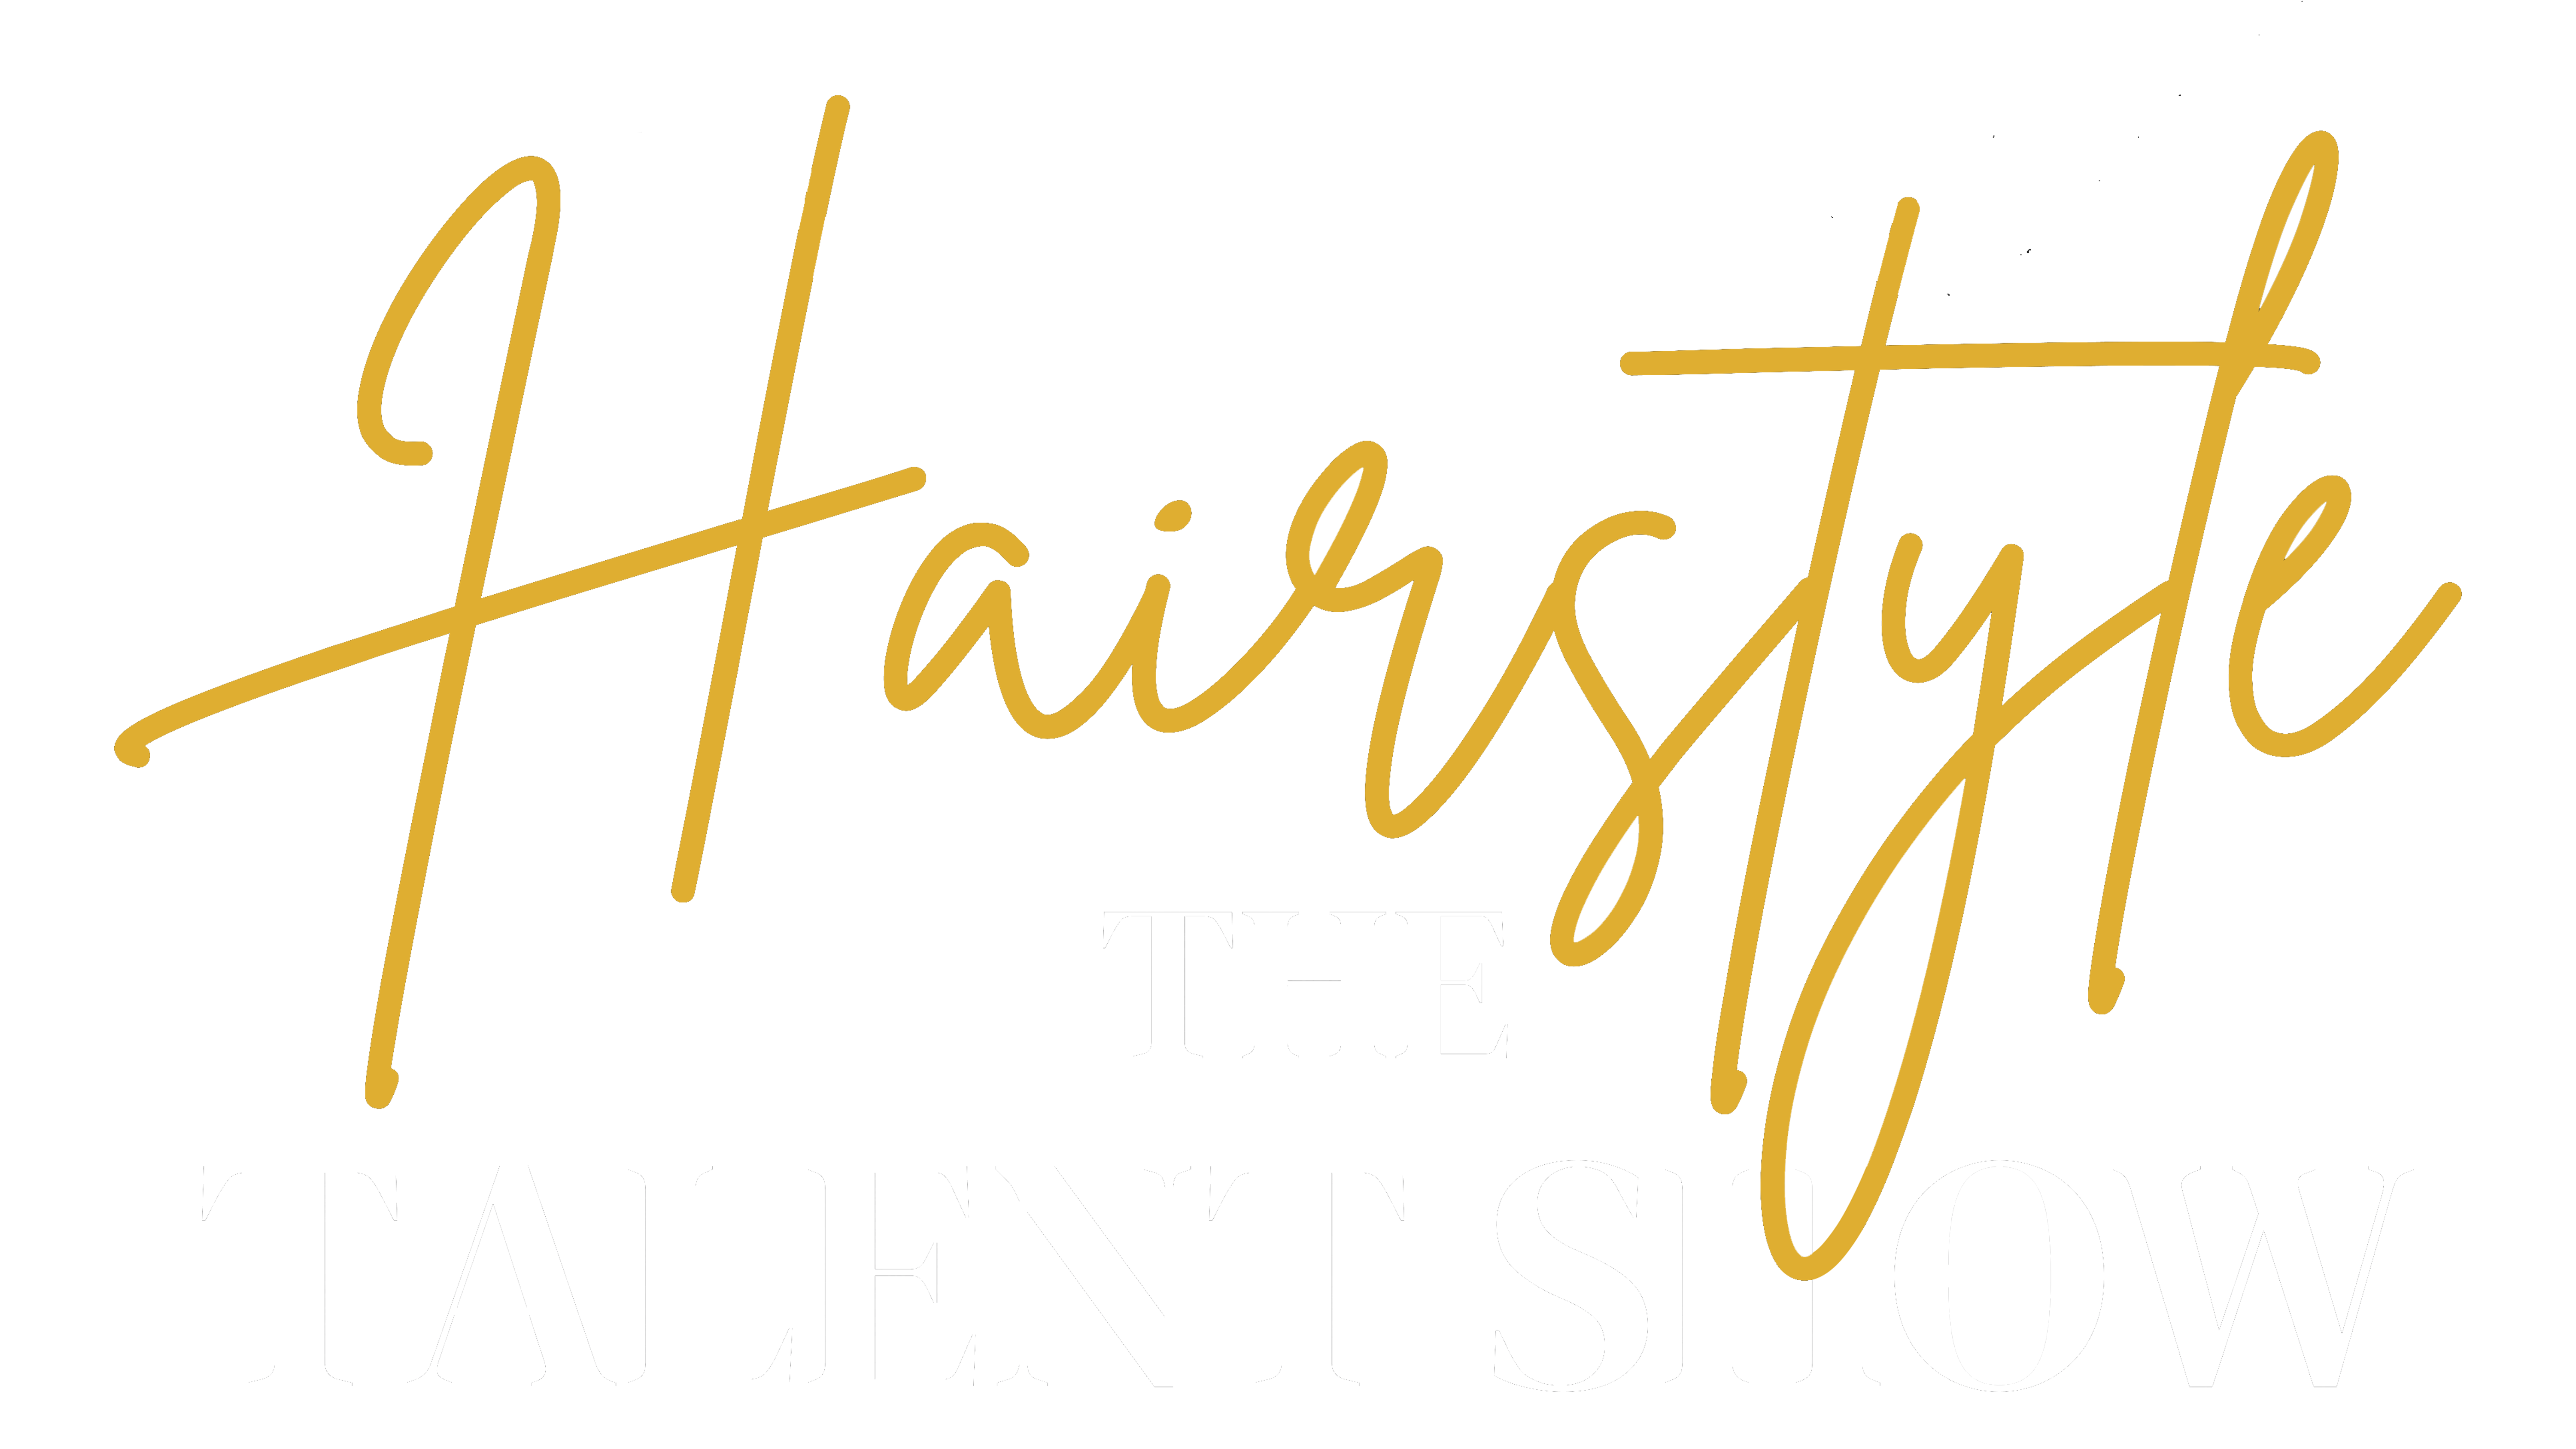 Hairstyle TV Talent show